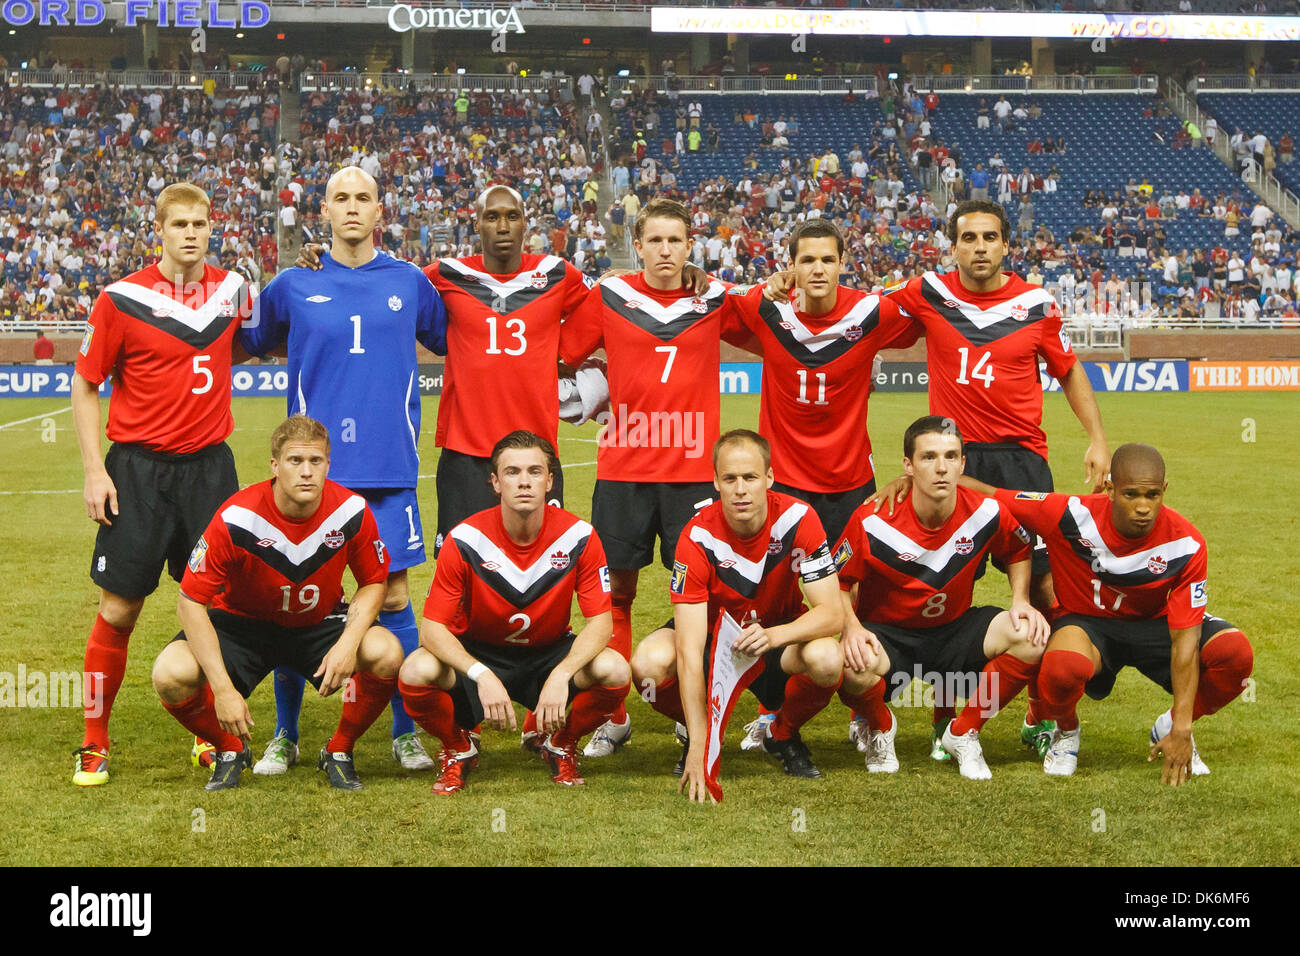 June 7, 2011 - Detroit, Michigan, U.S - The starting players for Canada pose for team photographs prior to the start of the match.  The United States defeated Canada 2-0 in the second match of the Group C-play opening round doubleheader of the 2011 CONCACAF Gold Cup soccer tournament played at Ford Field in Detroit, Michigan. (Credit Image: © Scott Grau/Southcreek Global/ZUMAPRESS. Stock Photo